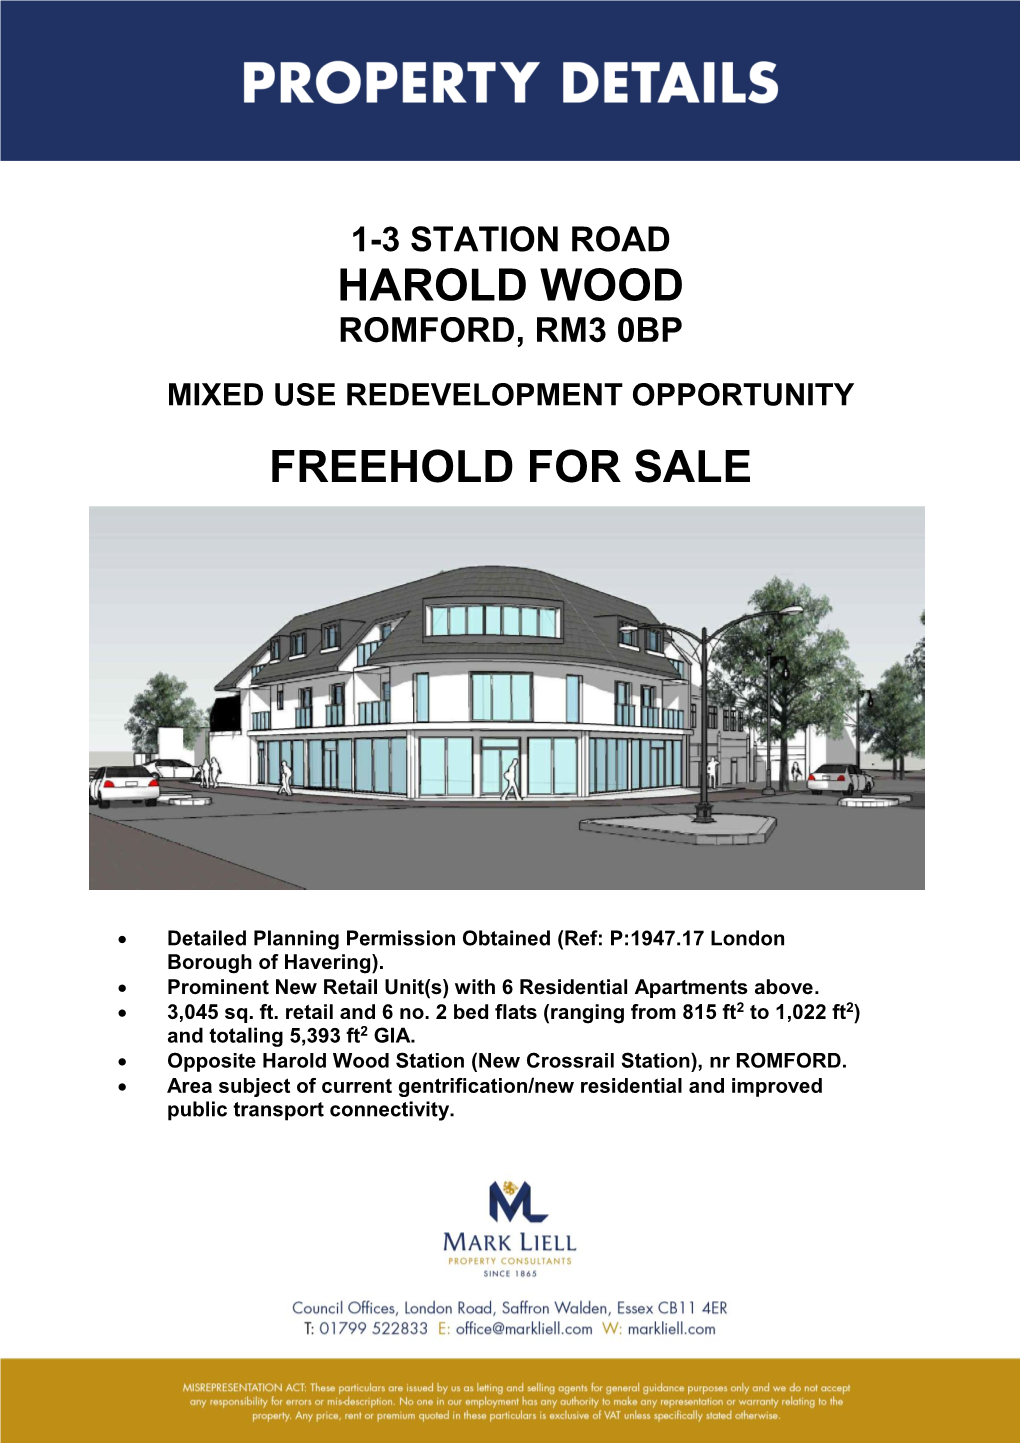 Harold Wood Freehold for Sale